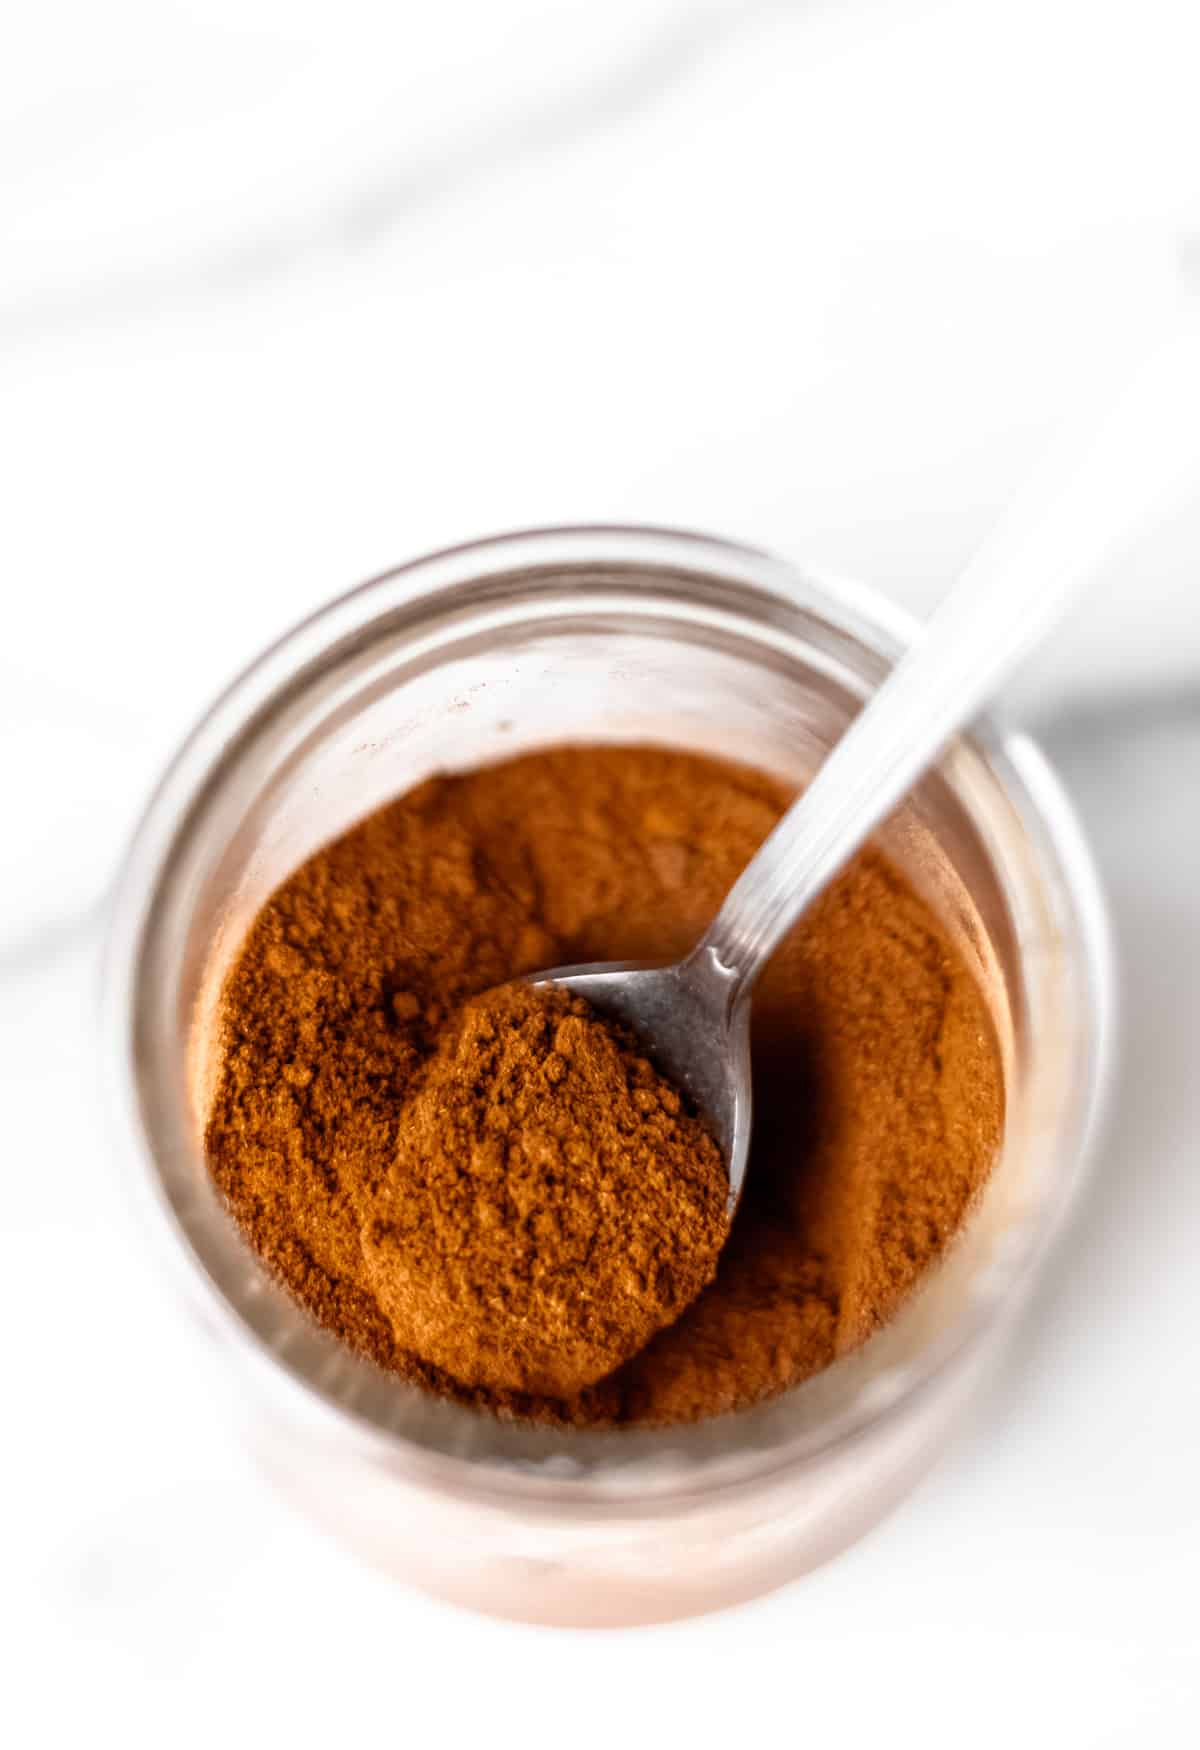 A spoon inside of a glass jar filled with apple pie spice mix.